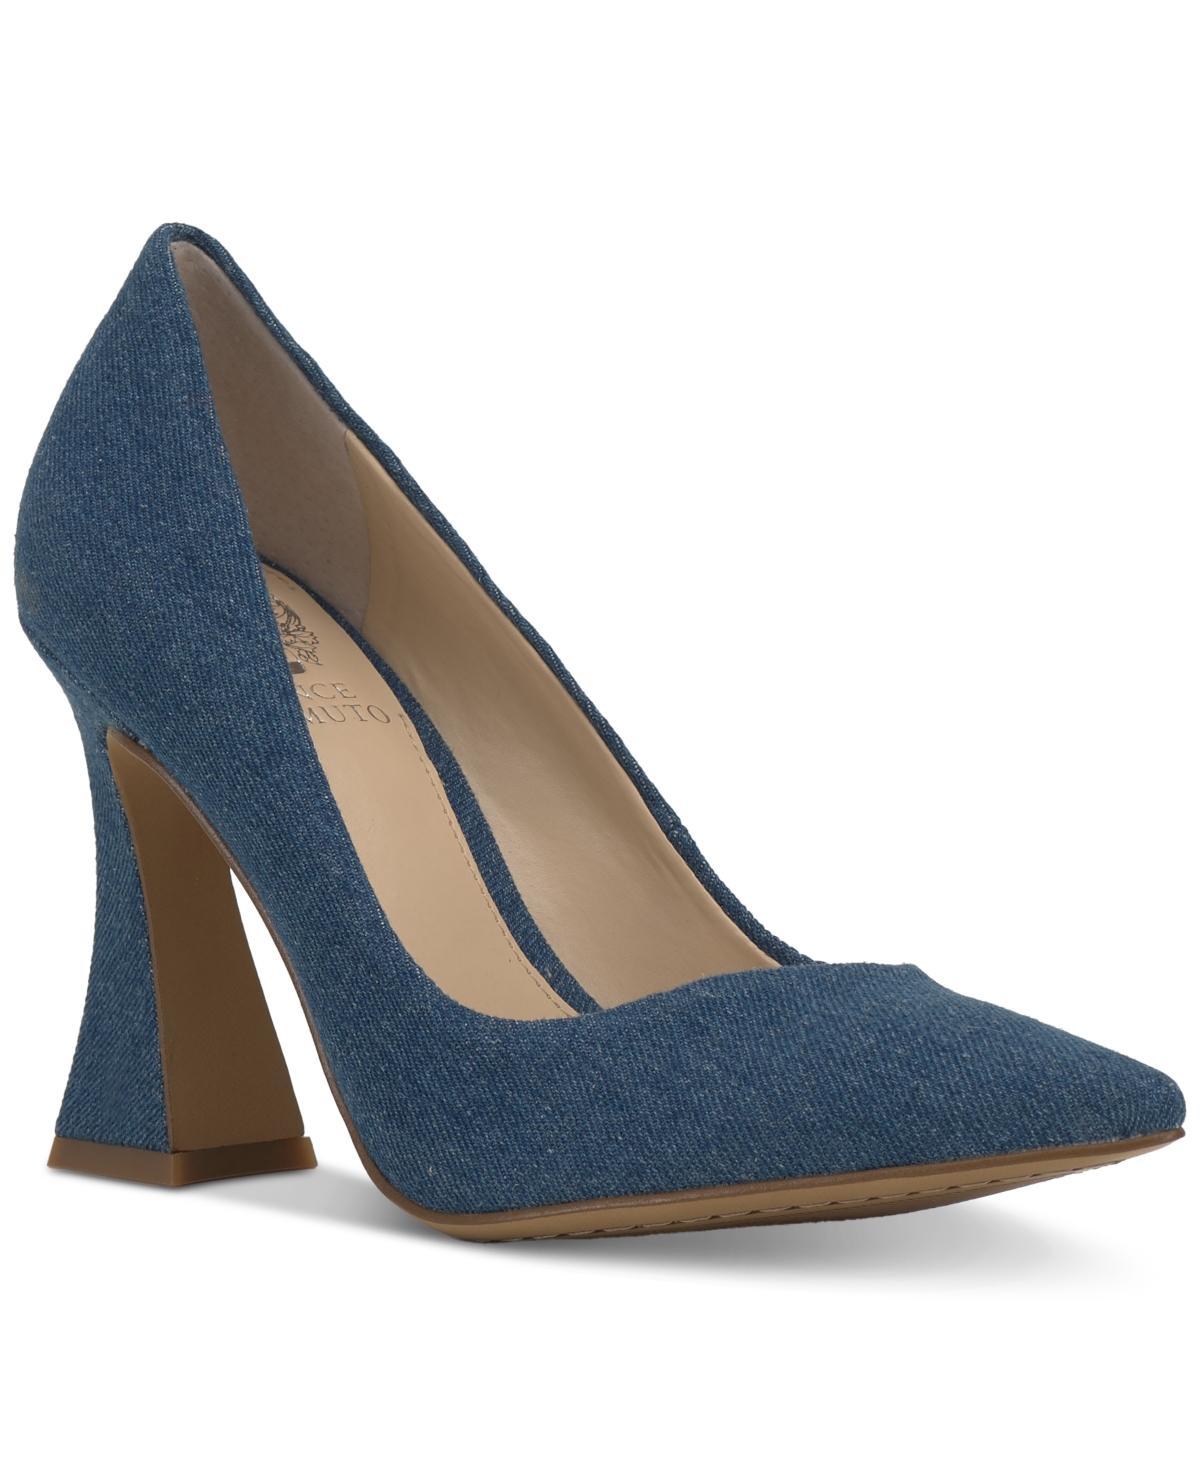 Vince Camuto Akental Pointed Toe Pump Product Image